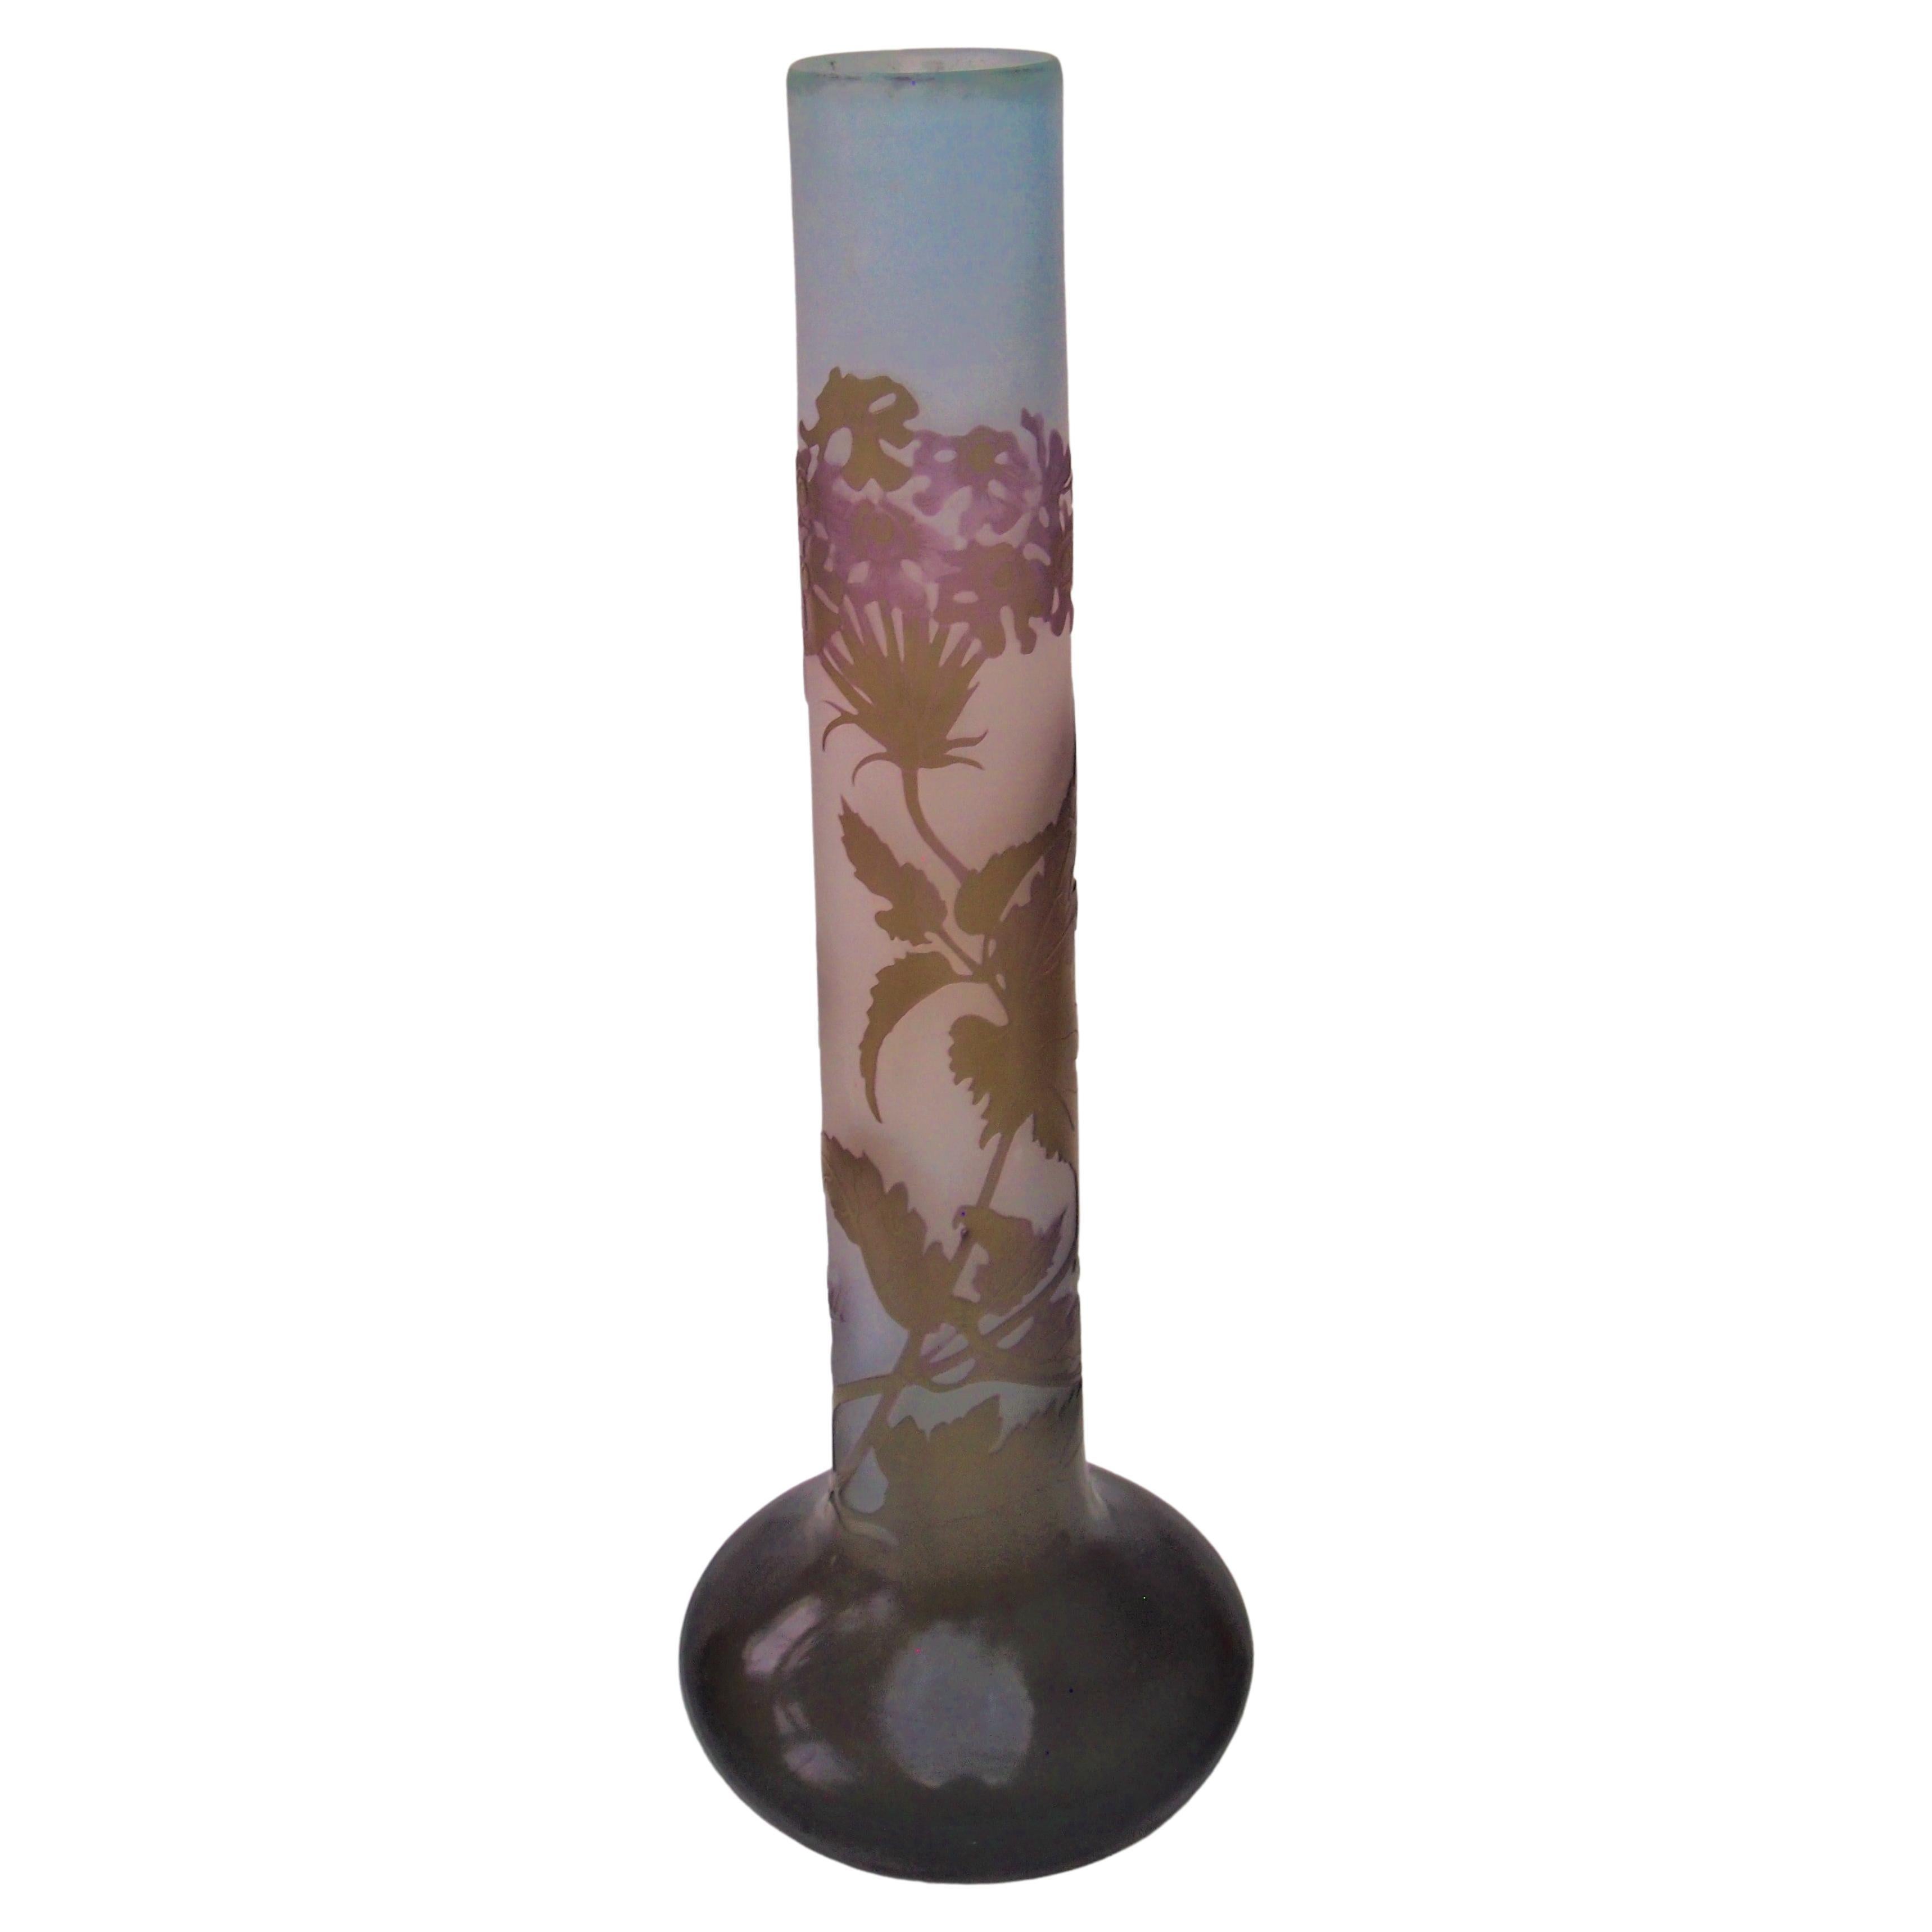 French Art Nouveau Emile Galle Cameo Glass Vervain Blossom Vase c1908 For Sale